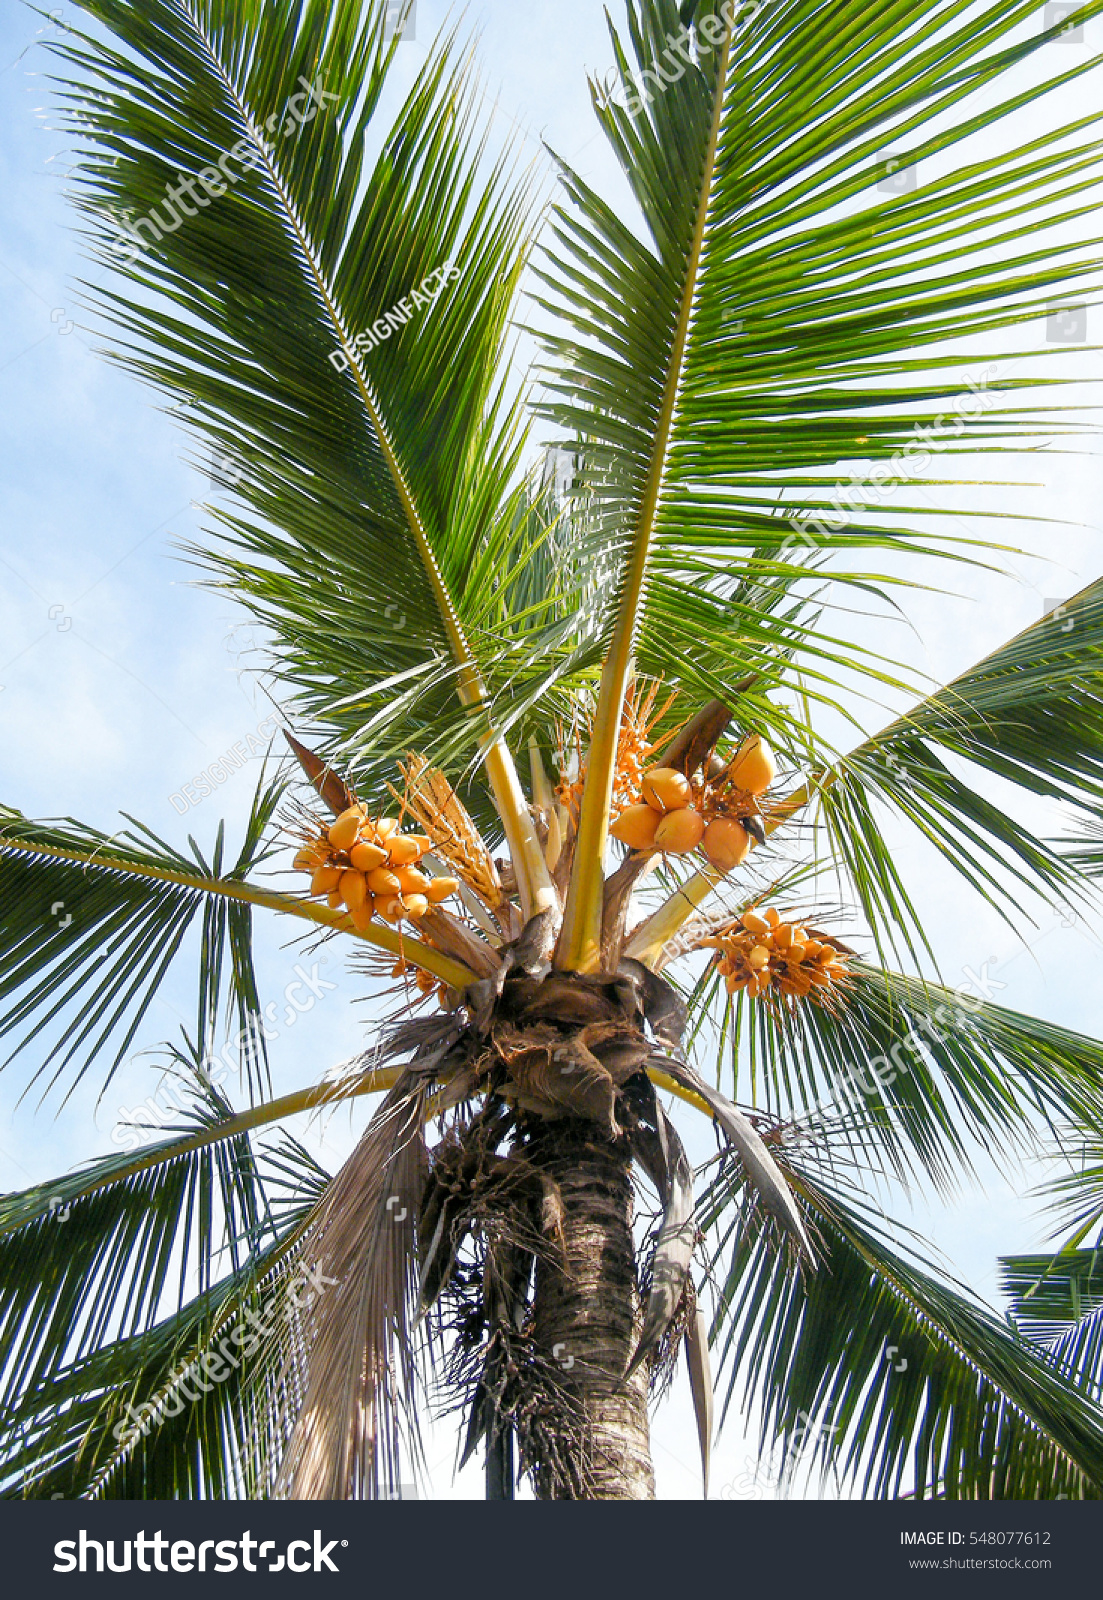 King Coconuts Cluster Palm Tree King Stock Photo 548077612 - Shutterstock